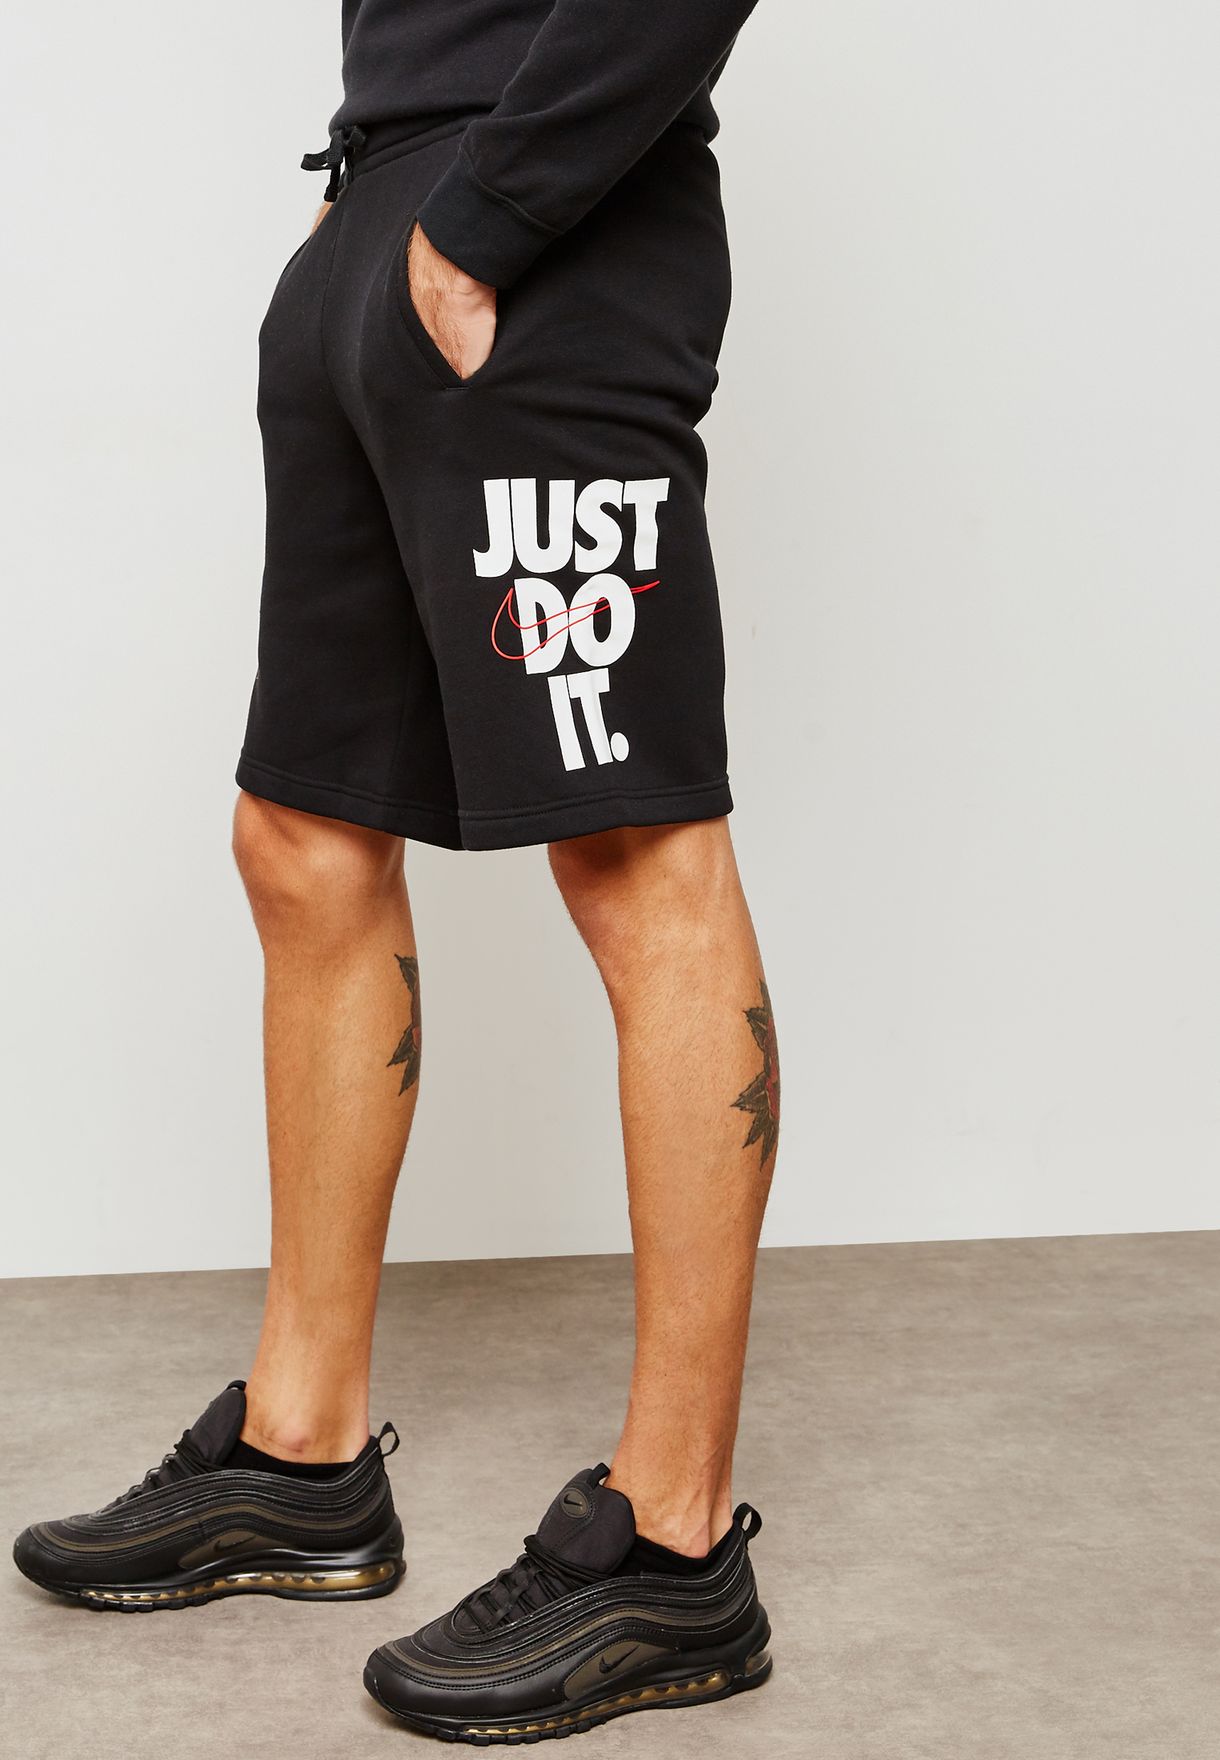 mens nike just do it shorts cheap online